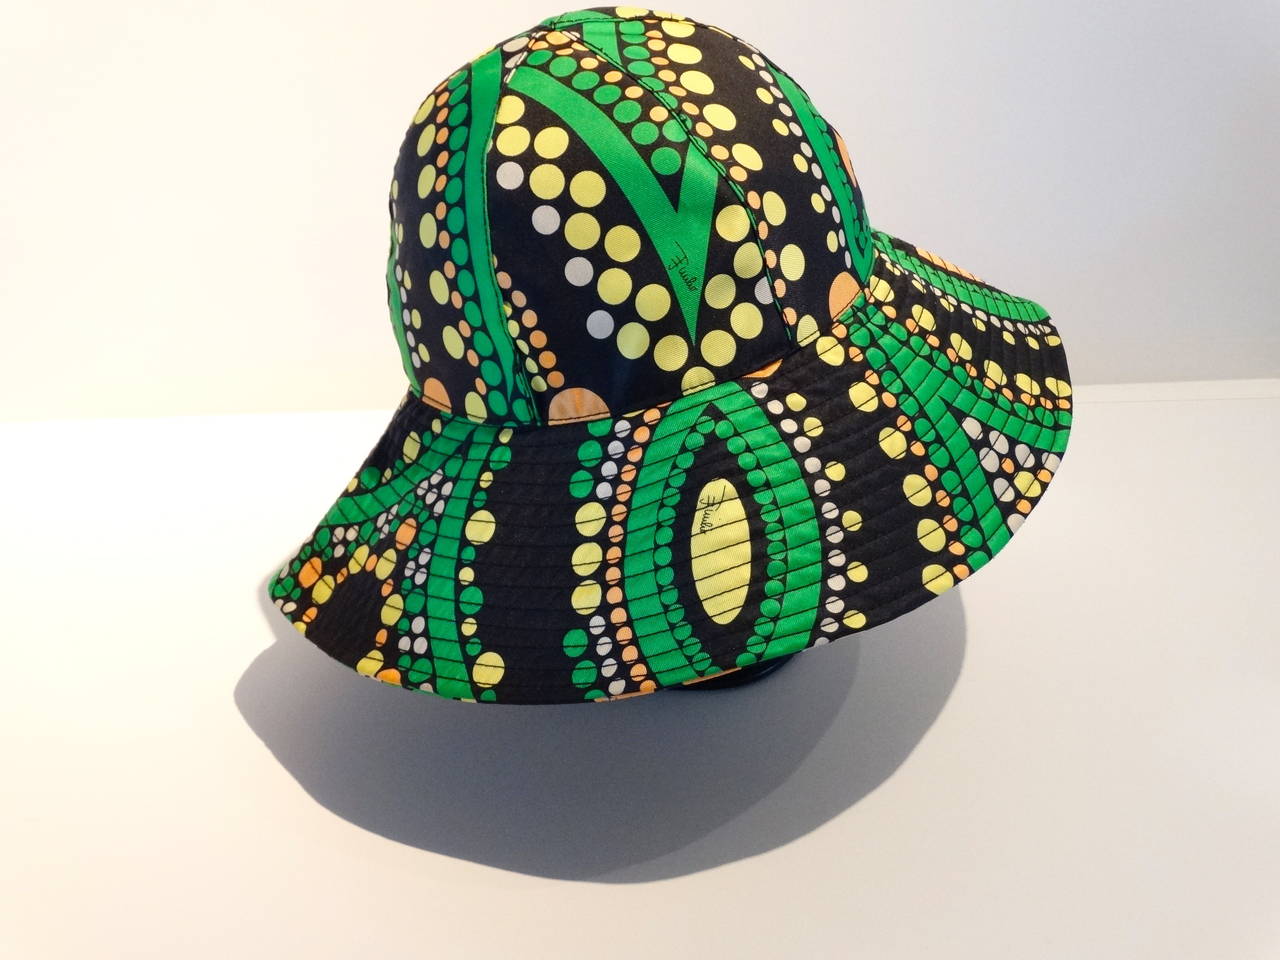 Early 21st century Wide-brimmed sun hat, iconic Pucci print. 
Made in Italy. Style number 77GF01 labeled sz II 
Bright colours in the mod geometric designs of black, green, orange, white and yellow. 

Measurements are:
21 3/4